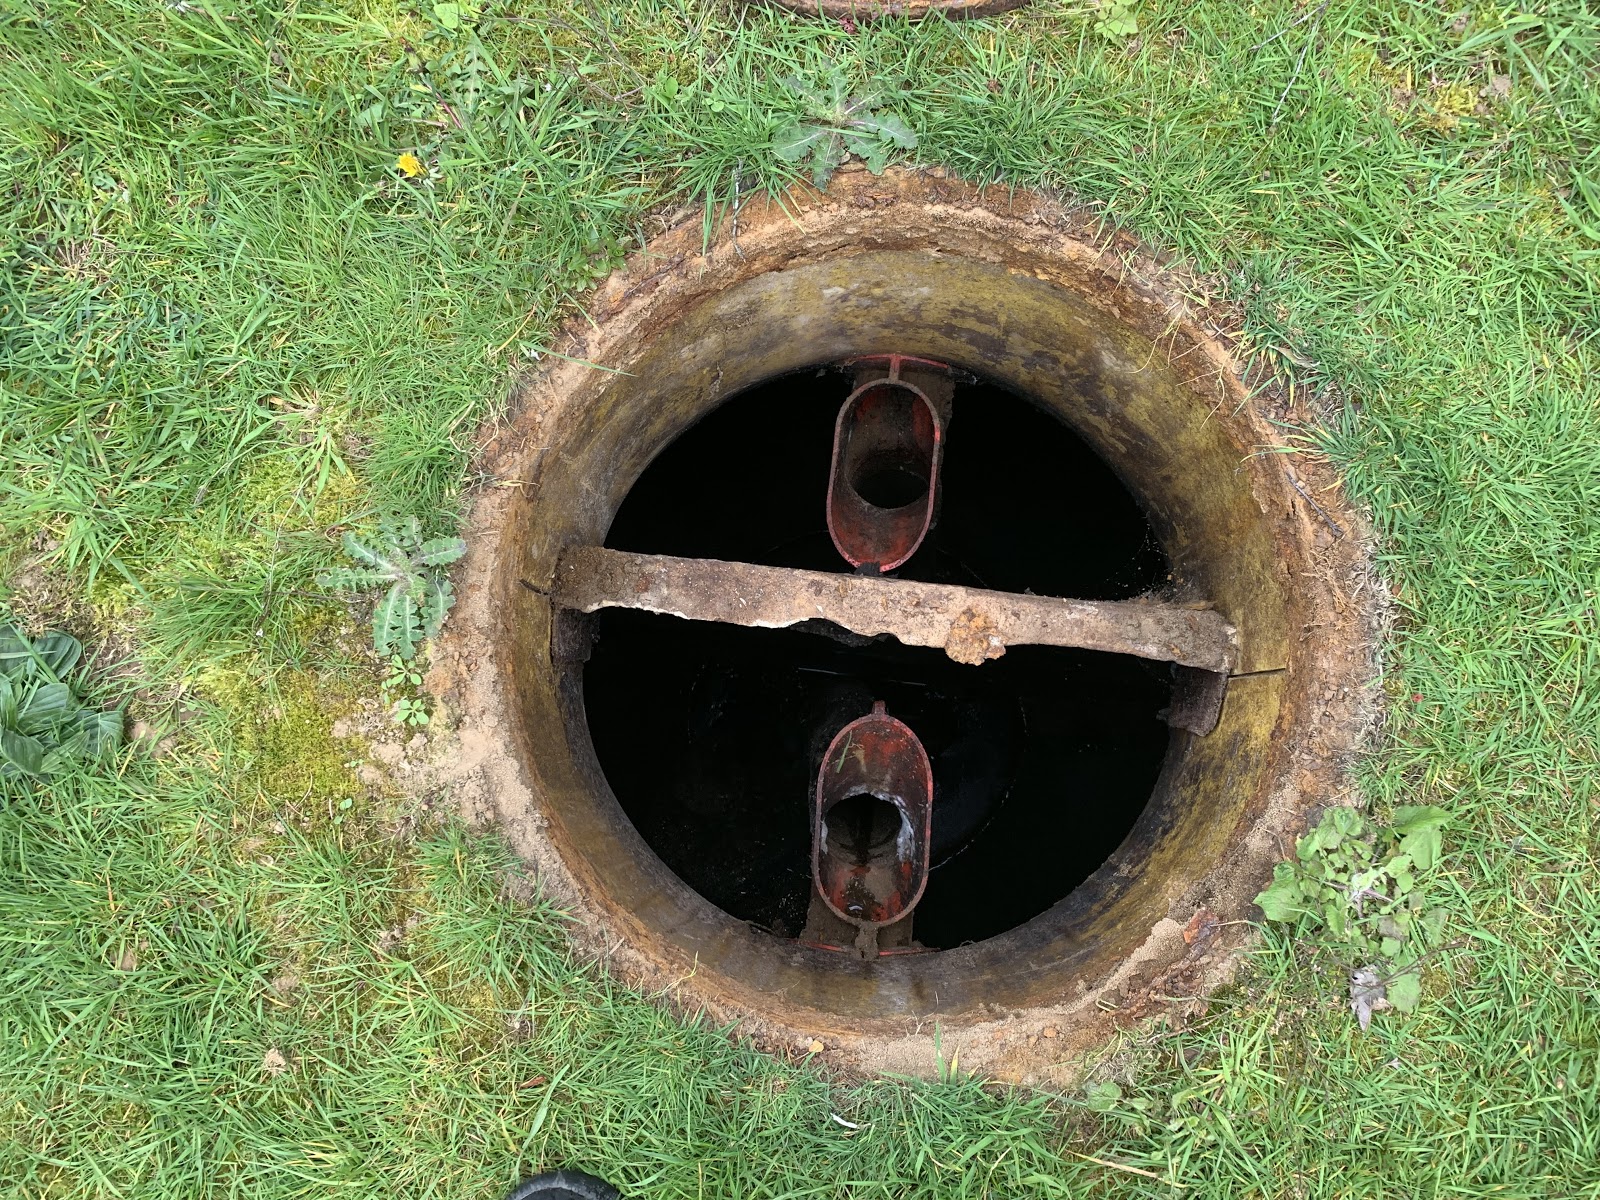 An image of a septic tank maintenance hole in the ground.